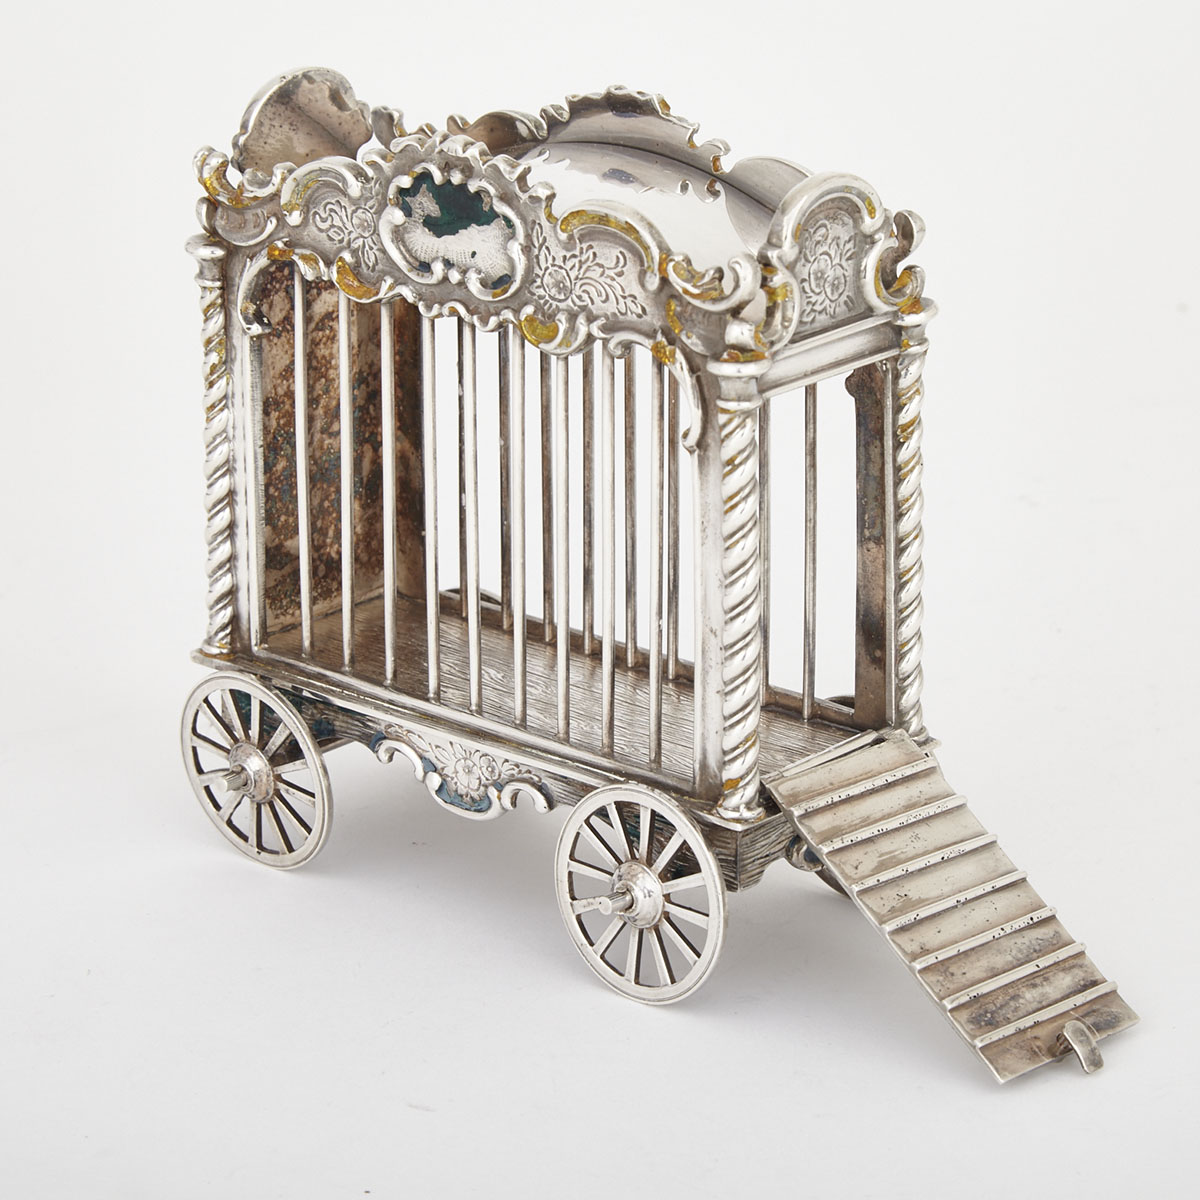 Italian Silver and Enamel Circus Lion Cage, Gene Moore for Tiffany & Co., New York, c.1990